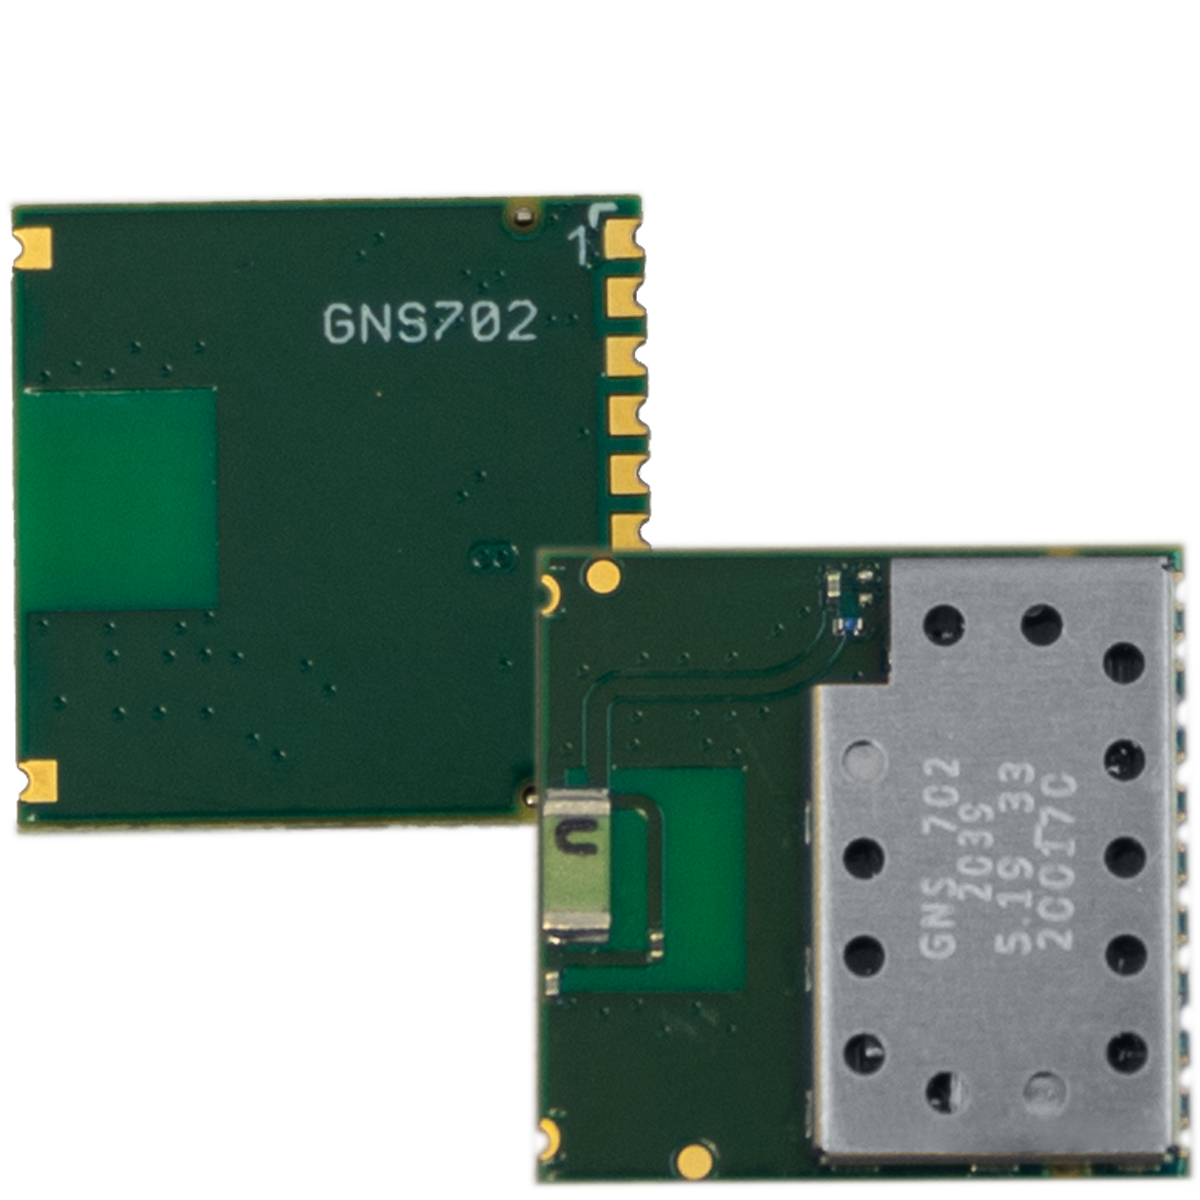 GNS702